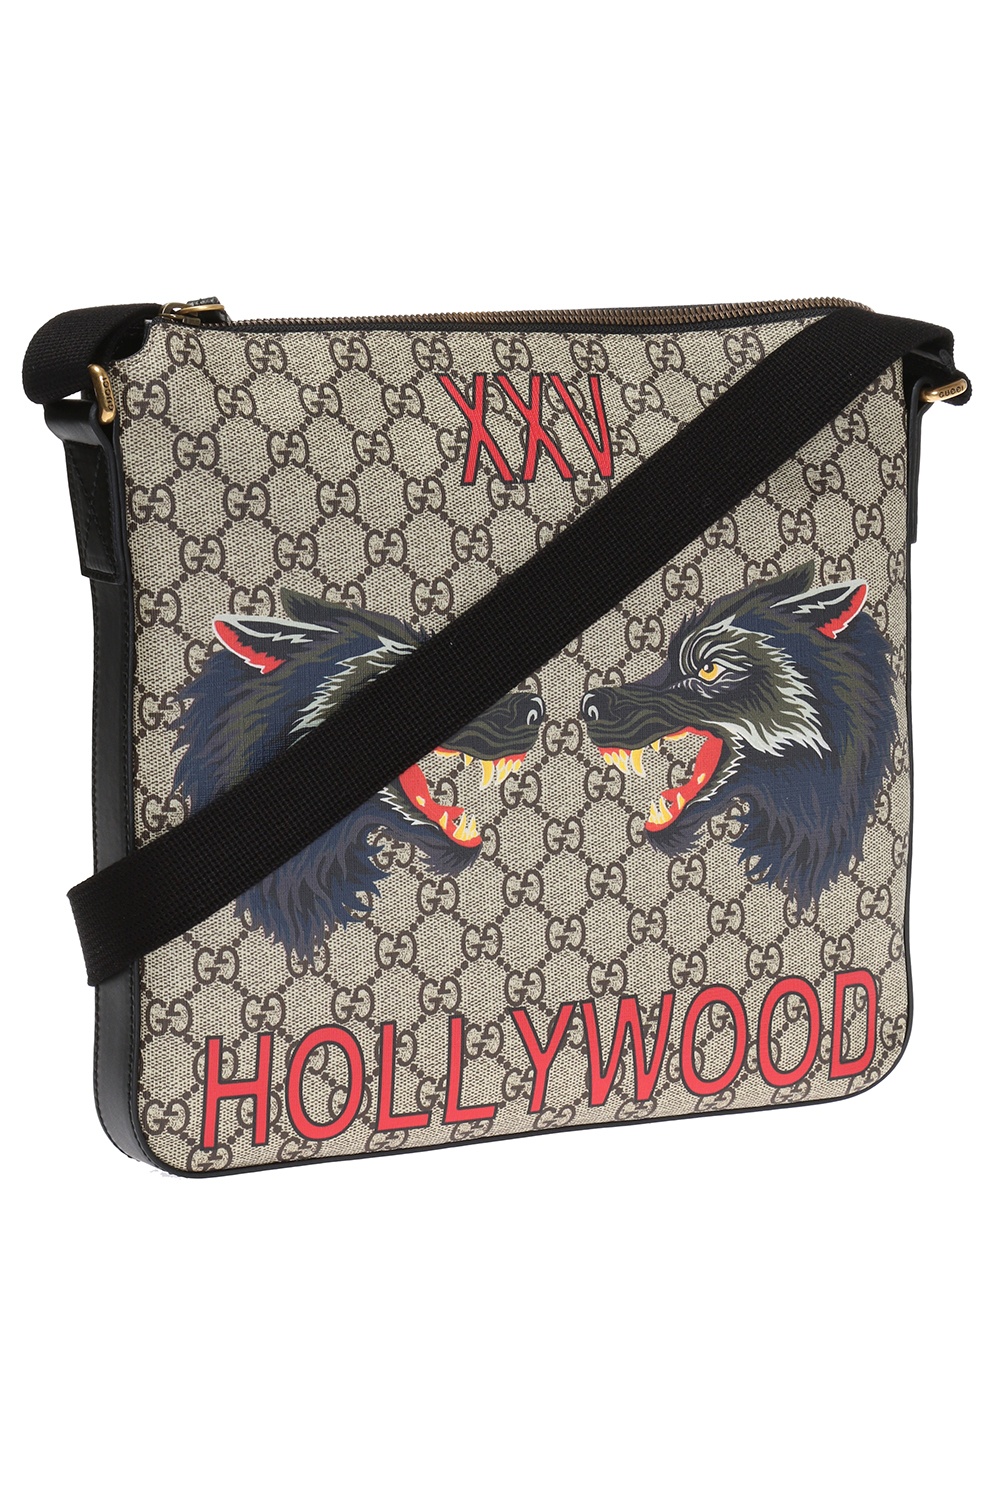 Gucci Grey/Black GG Supreme Canvas and Leather Wolf Card Holder Gucci | The  Luxury Closet